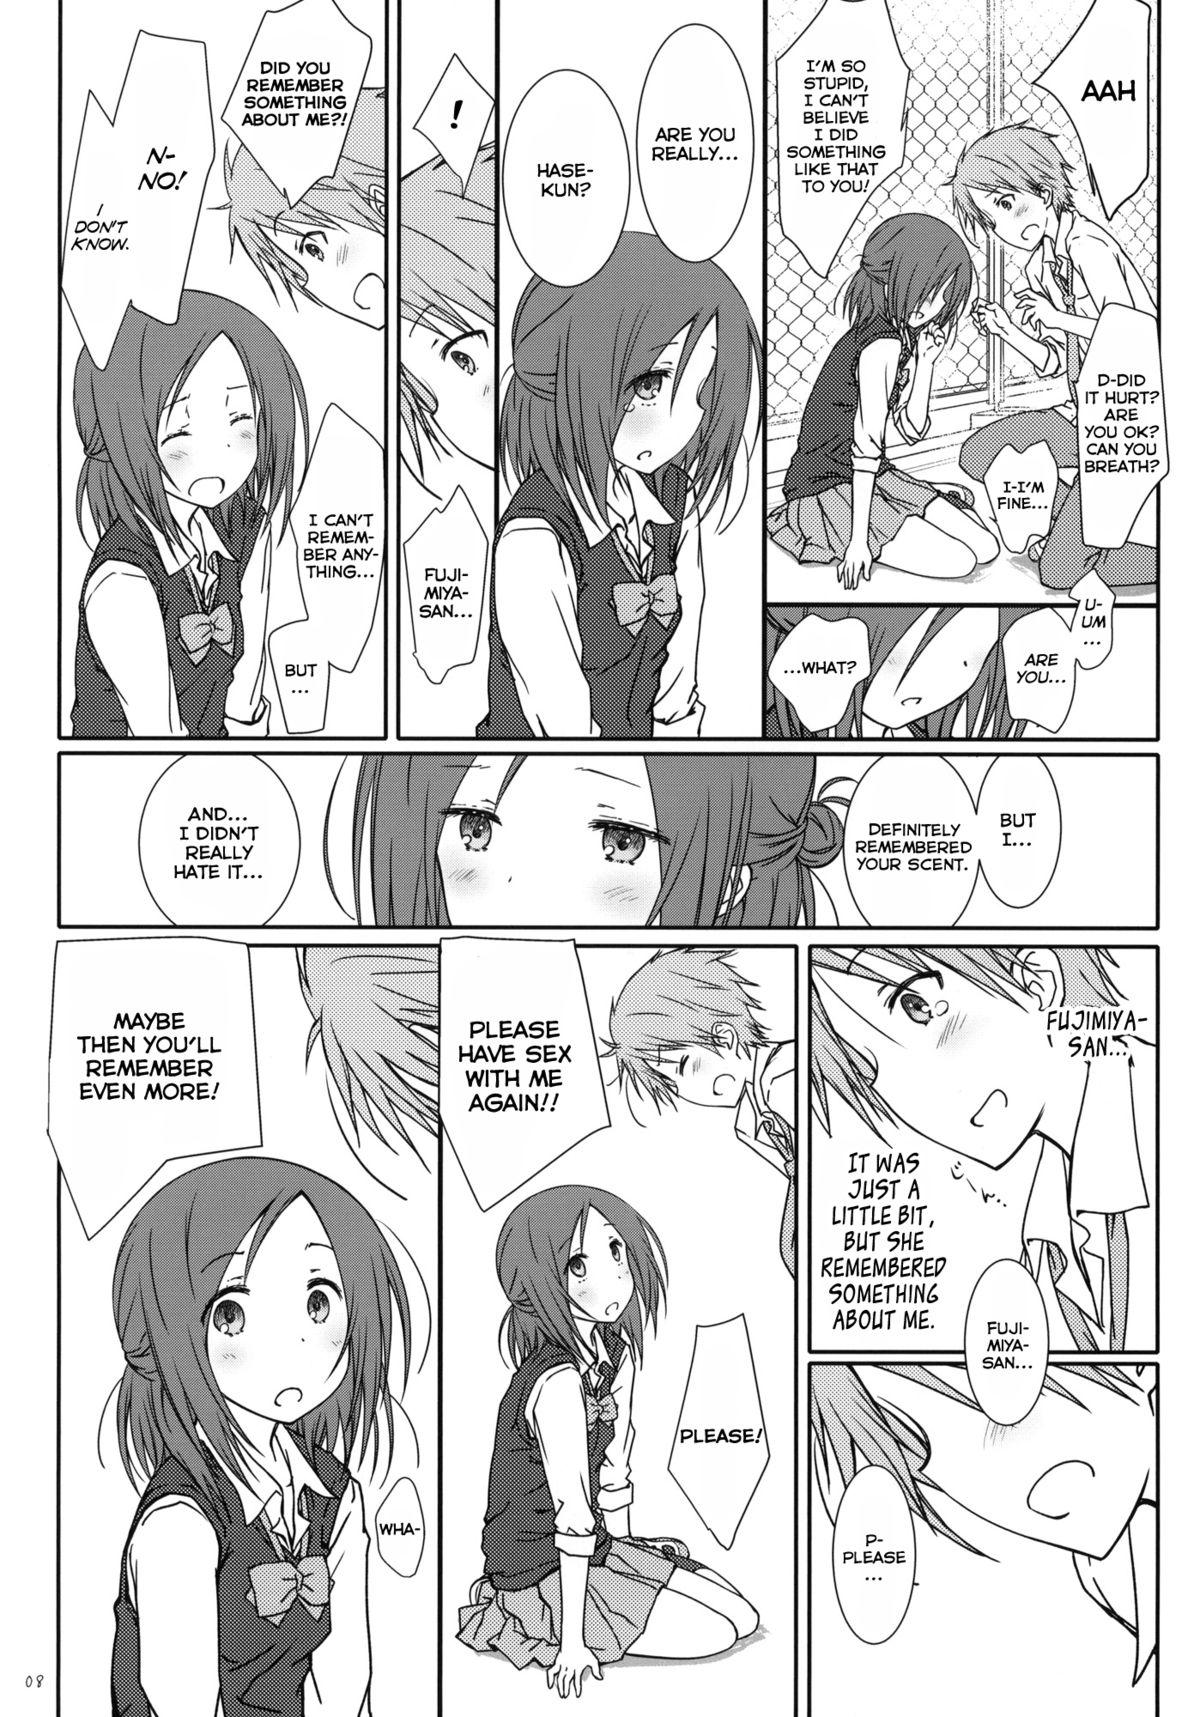 Filipina "Tomodachi to no Sex." - One week friends Free Rough Sex - Page 7